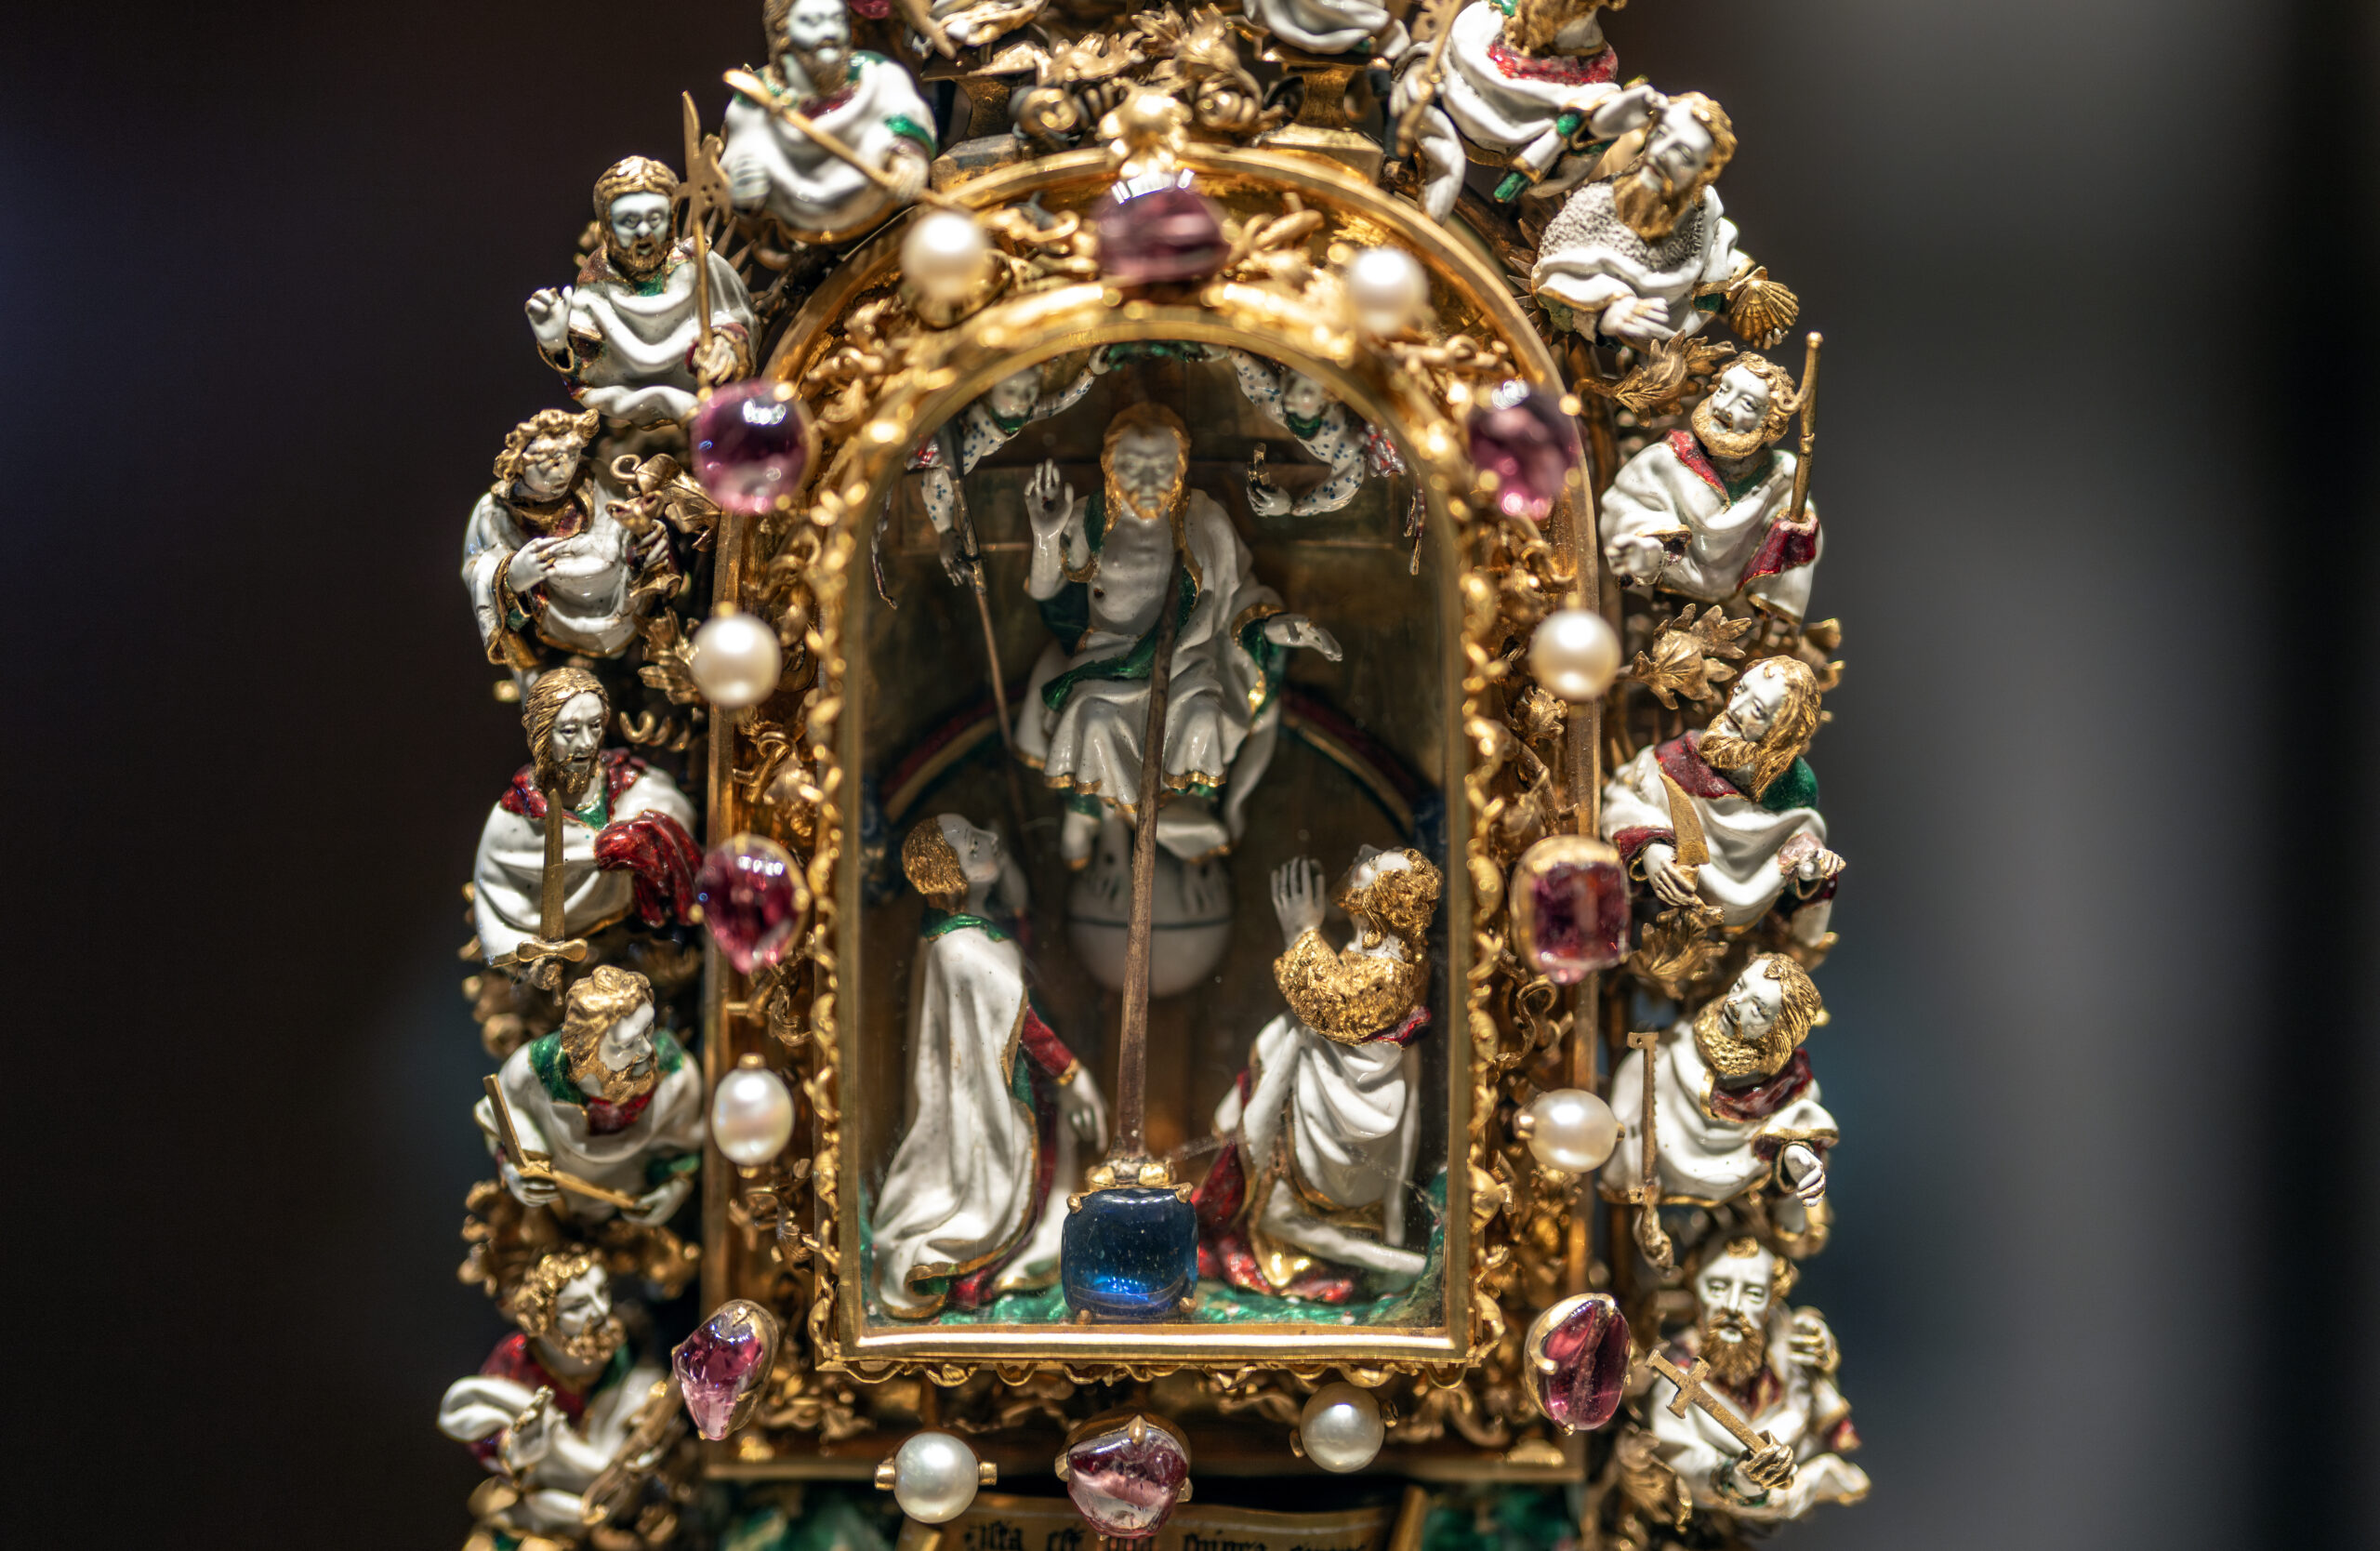 The Holy Thorn Reliquary of Jean, duc de Berry